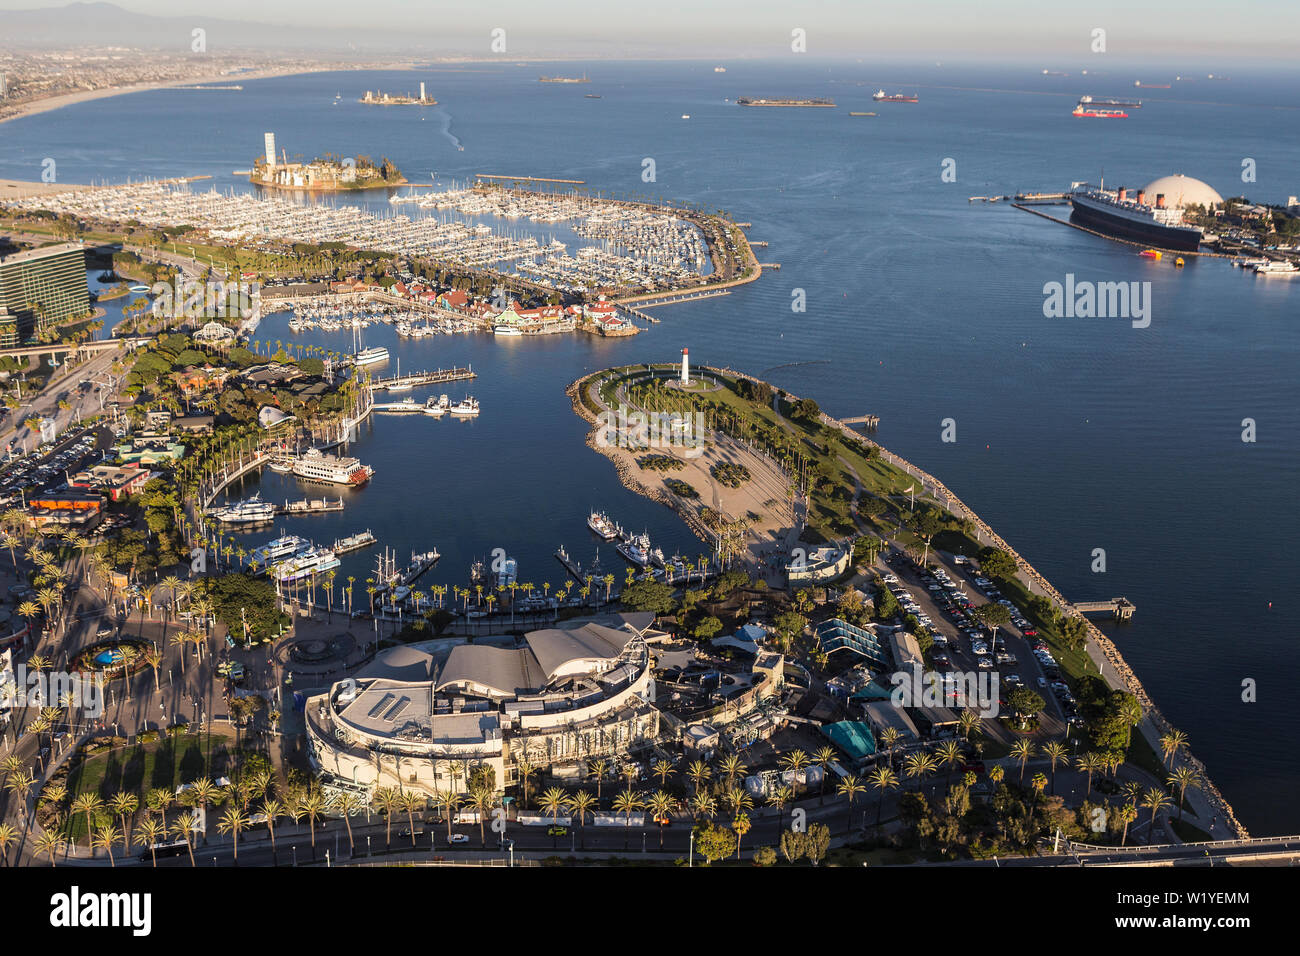 Long Beach, California, USA - August 16, 2016:  Aerial view of popular seaside tourist attractions including Rainbow Harbor, Aquarium, and the Queen M Stock Photo